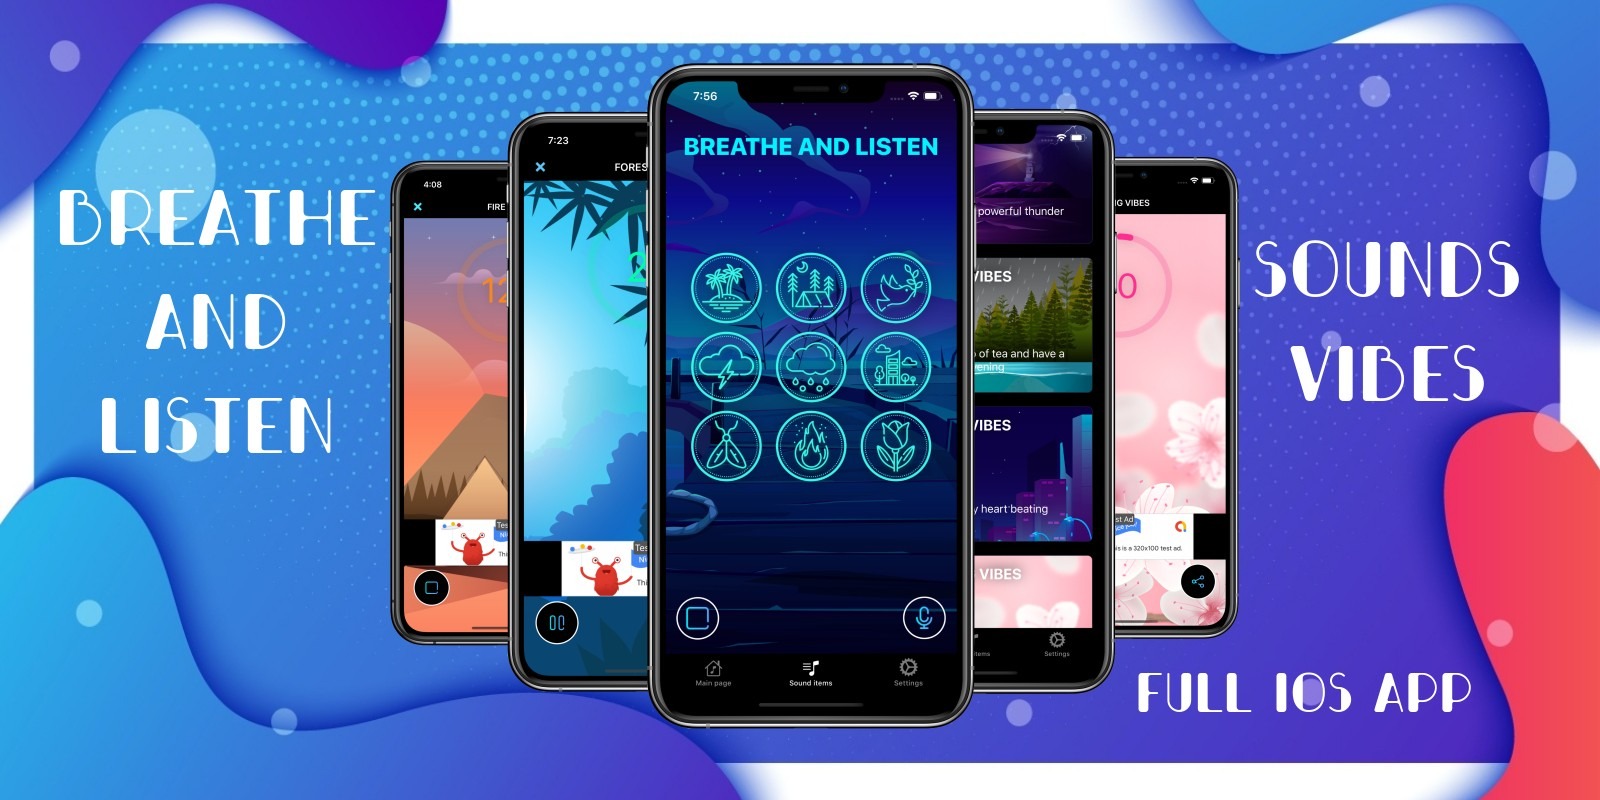 Sounds Vibes Full iOS Application